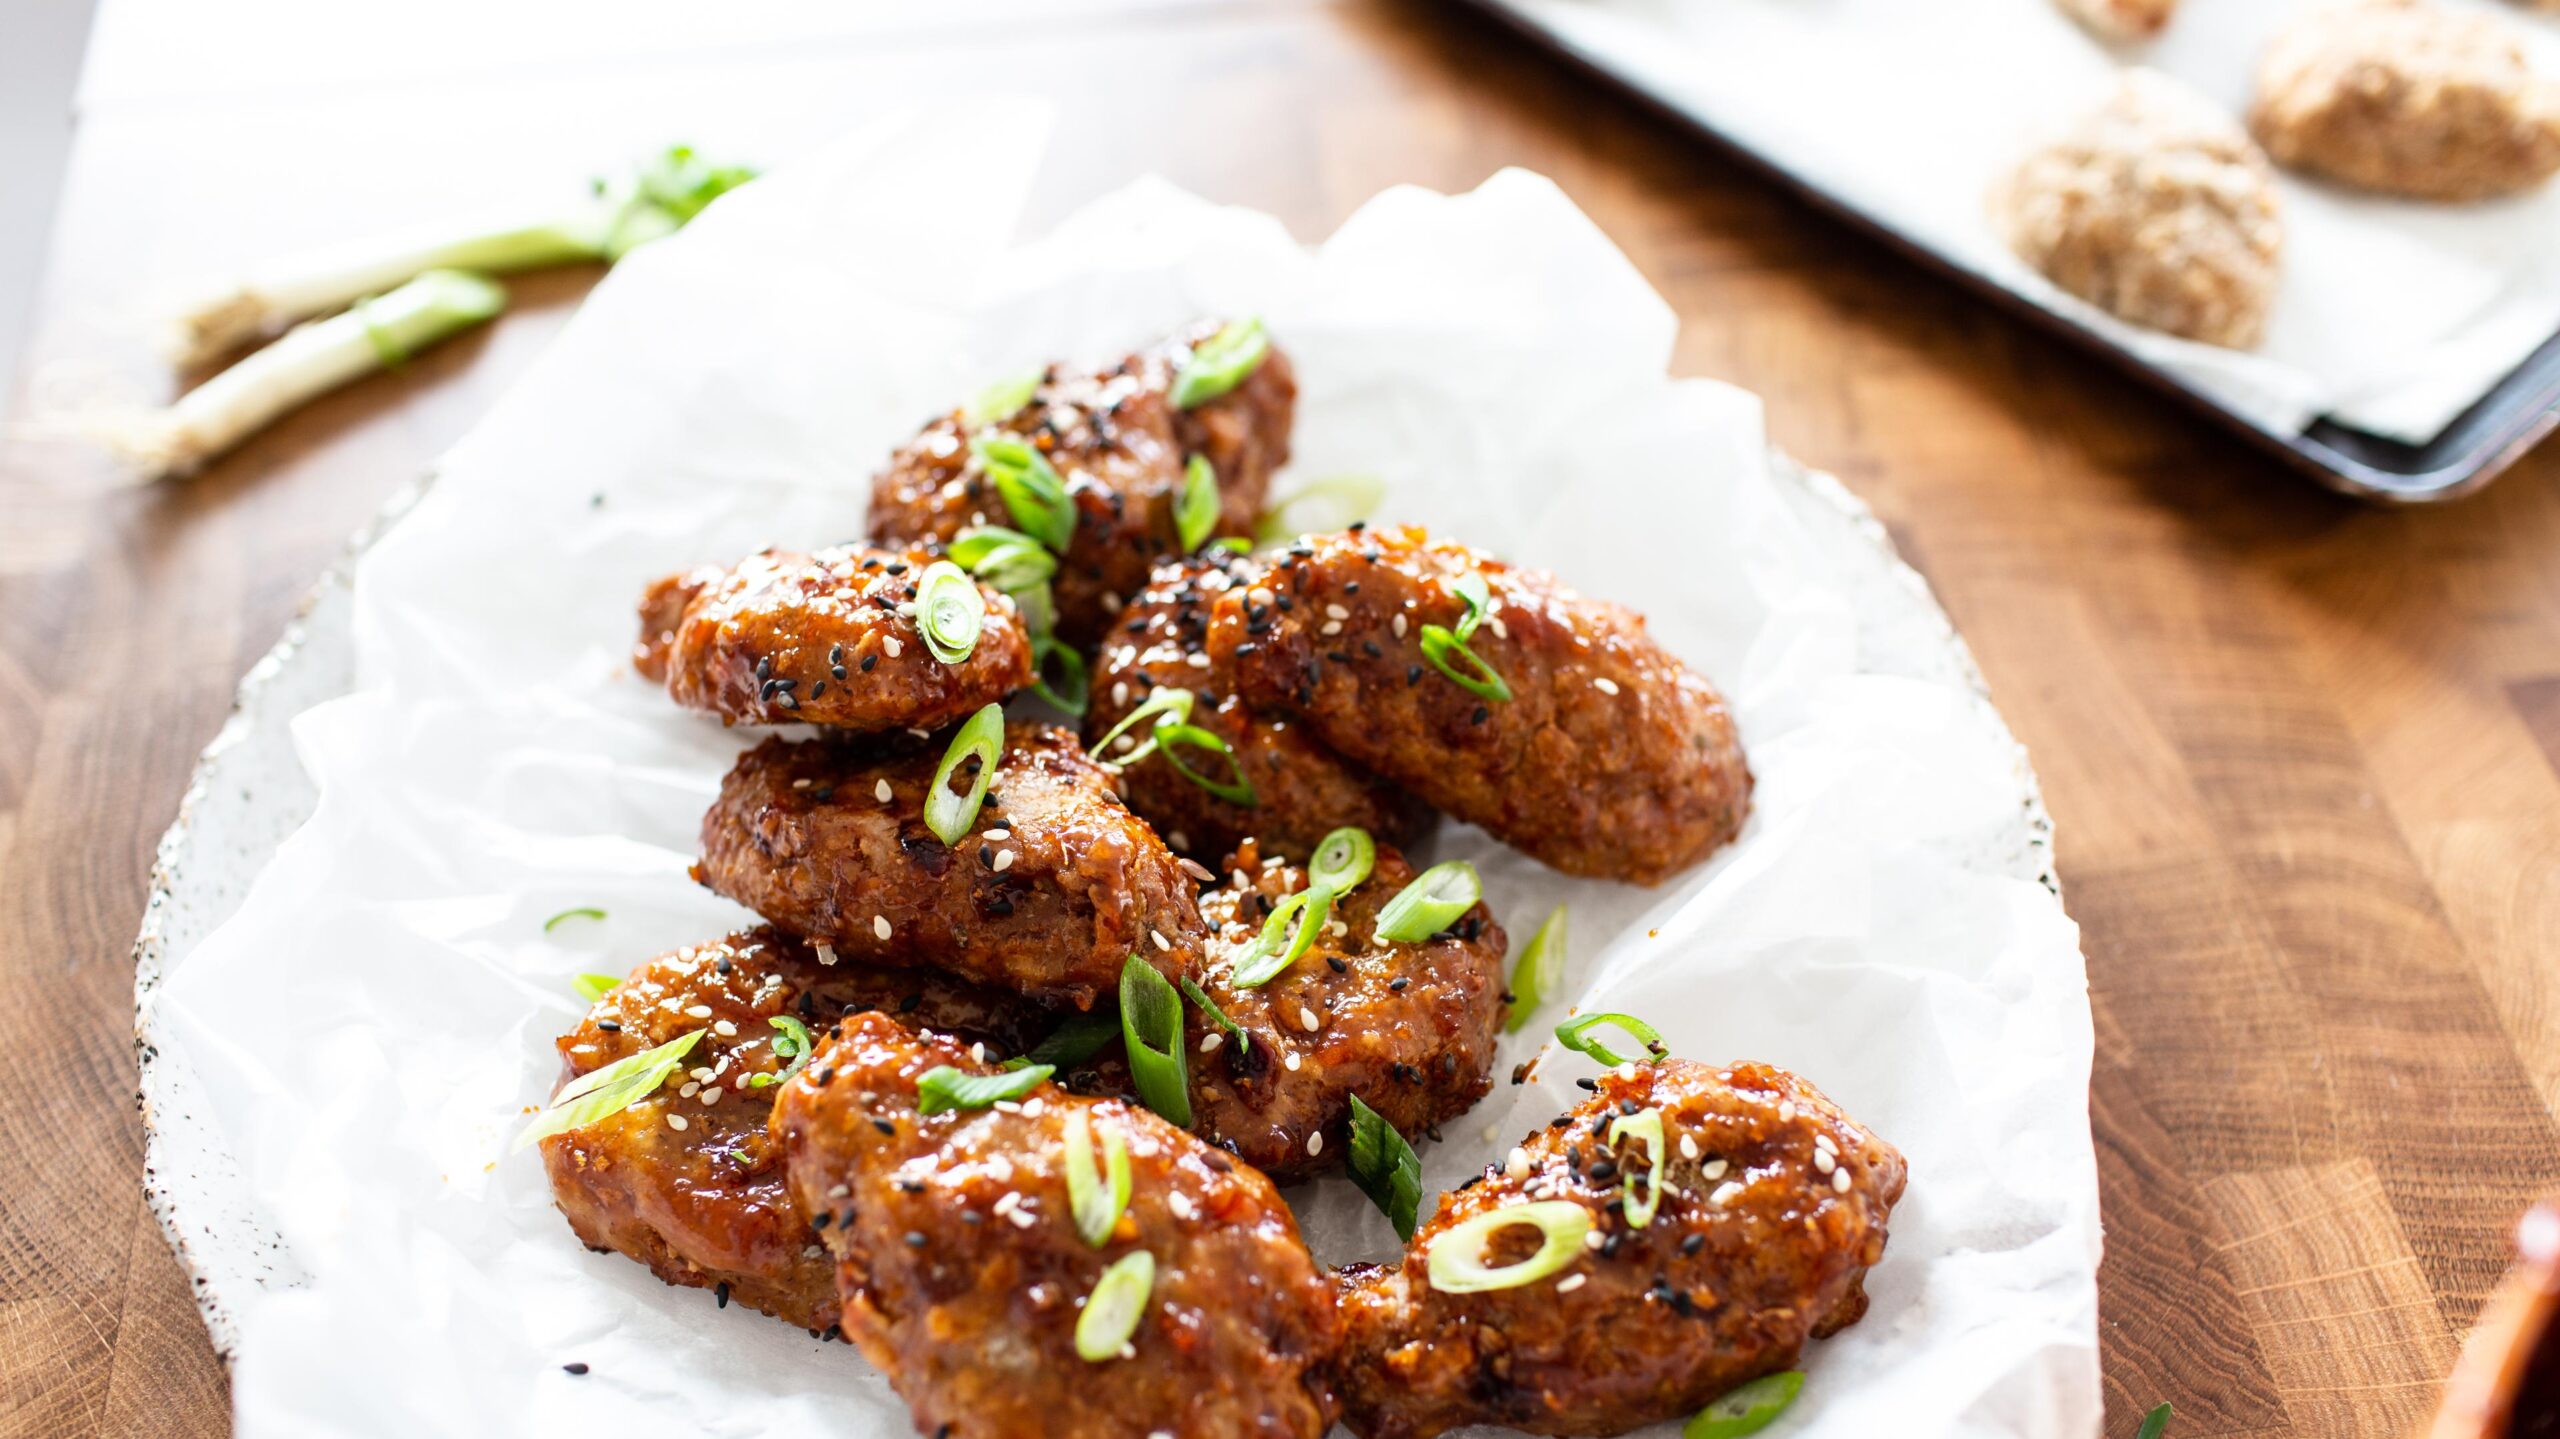  You won't even miss the real thing with this flavorful vegan take on Korean fried chicken.